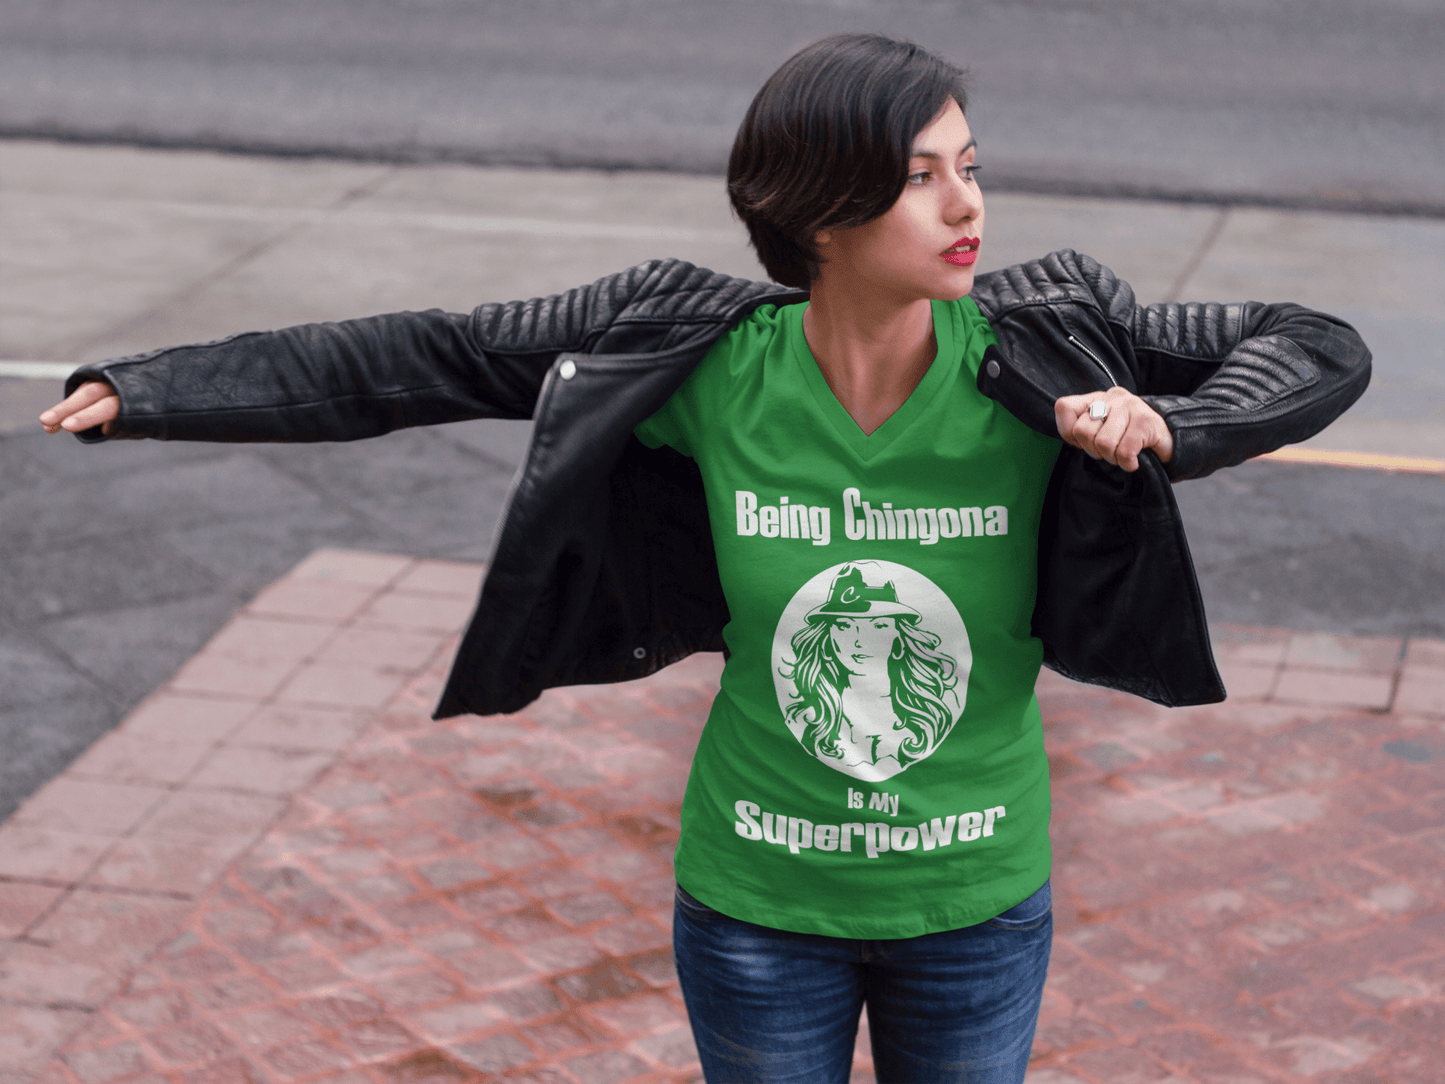 Ladies Green V-neck t-shirt with white lettering of "Being Chingona Is My Superpower" .